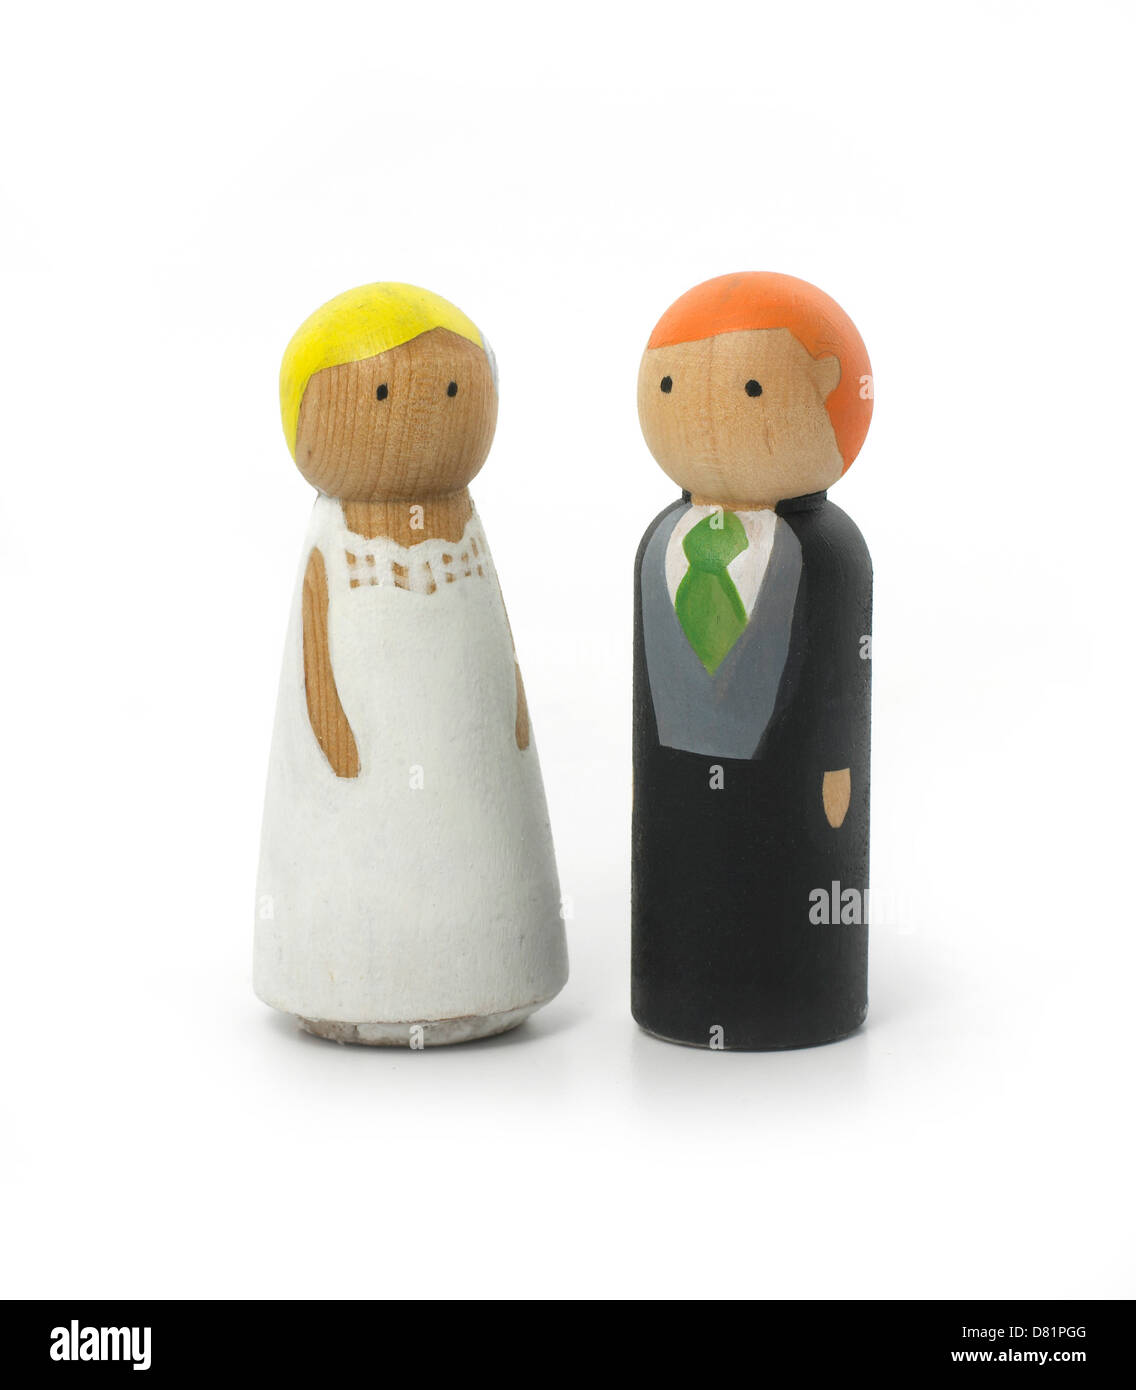 Wooden wedding figurines cut out white background Stock Photo